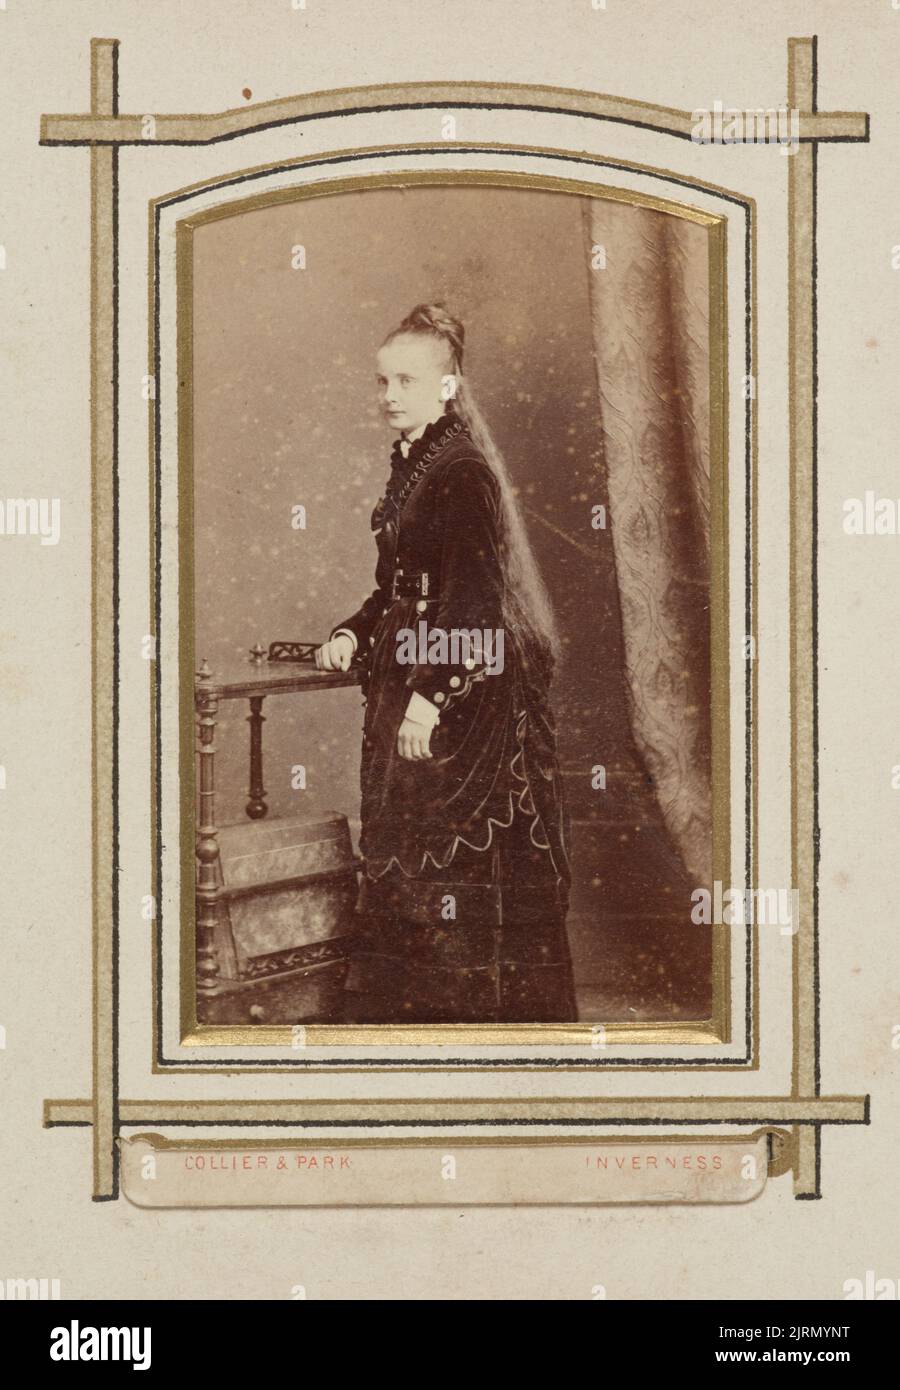 Untitled [Portrait of a Young girl with long hair], circa 1872, Inverness, von Collier & Park. Stockfoto